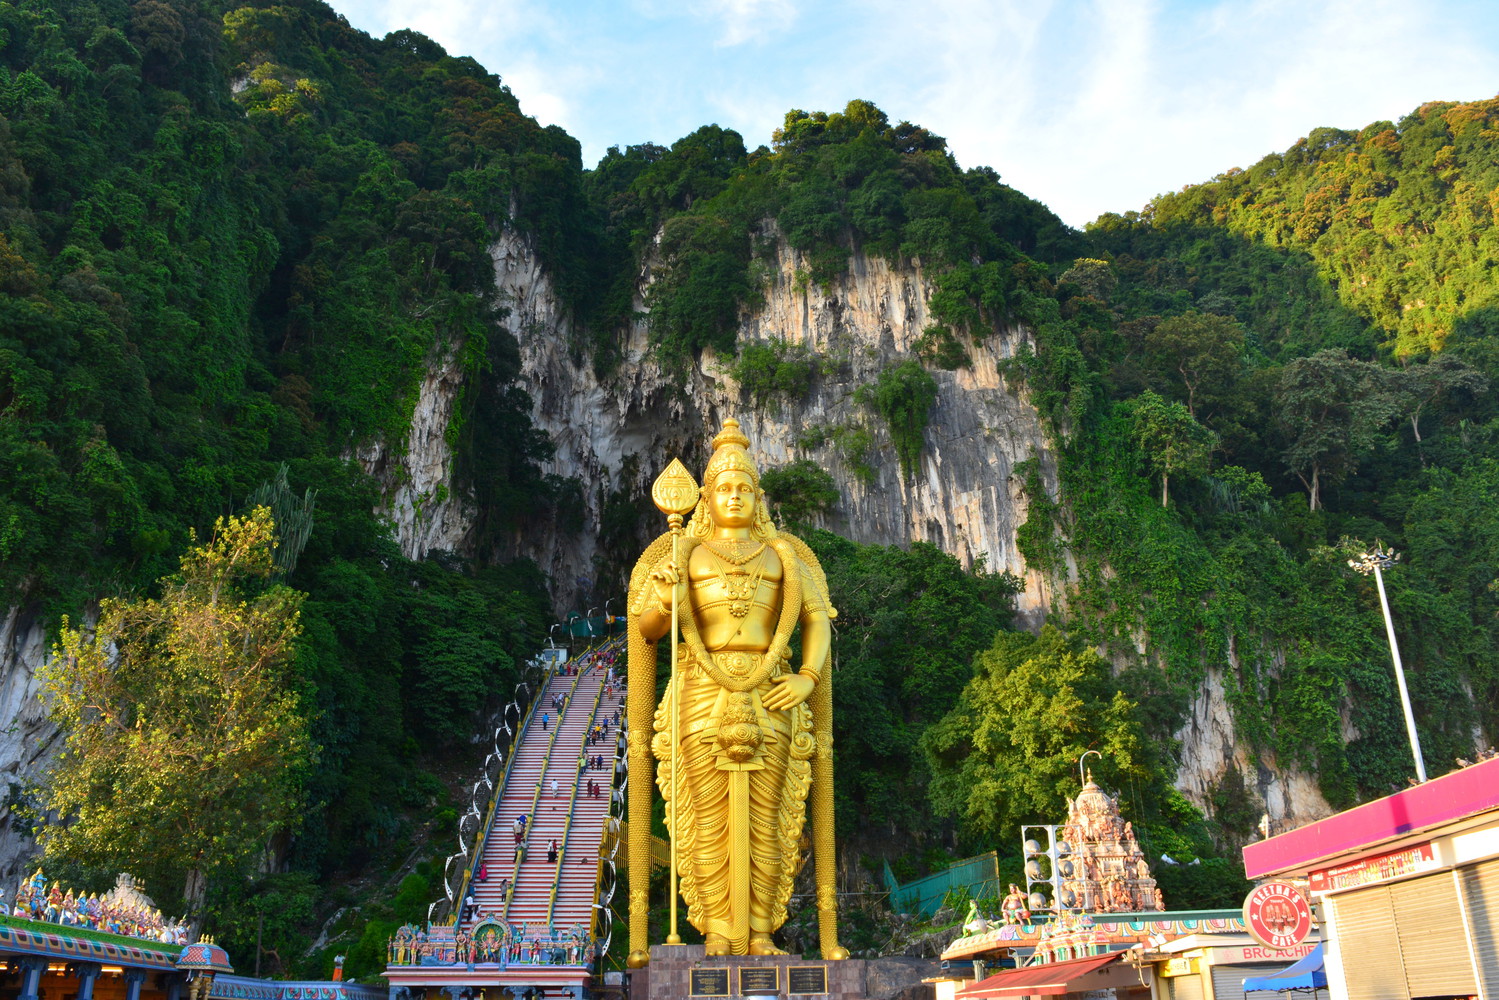 A tall statue of Lord Murugan in front of a flight of stairs leading to limestone caves named Batu Caves